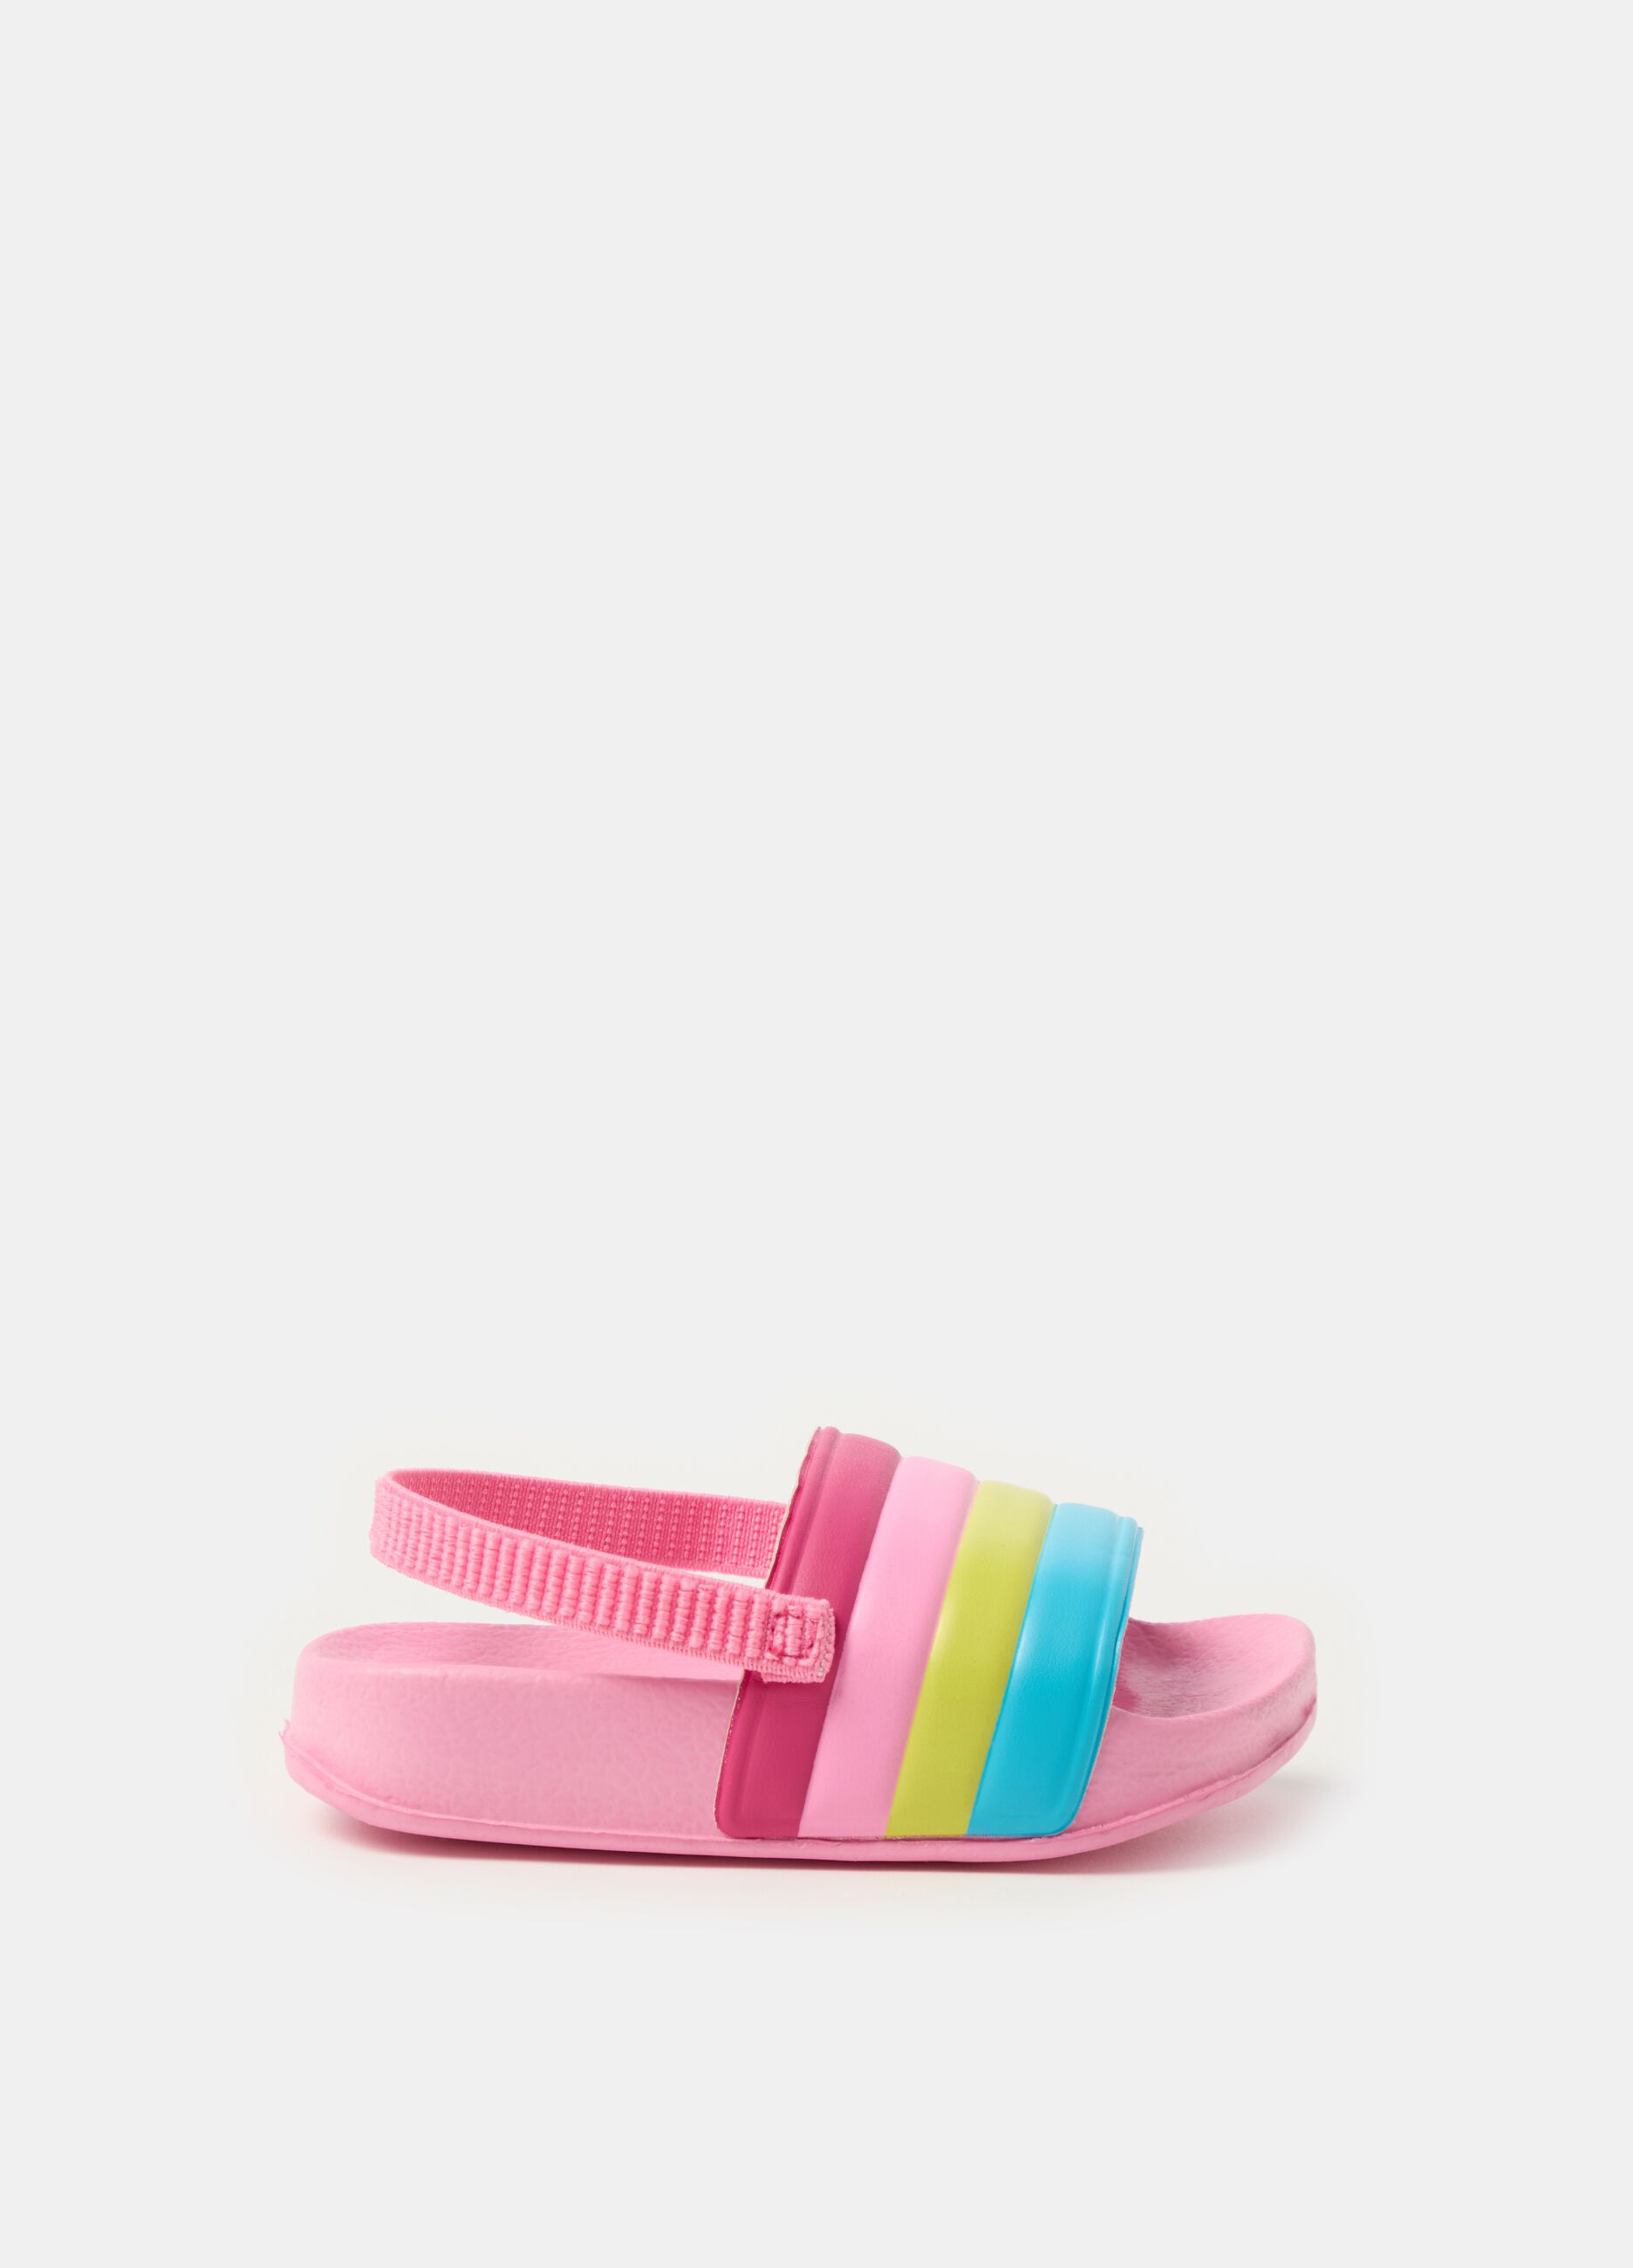 Sandals with striped pattern